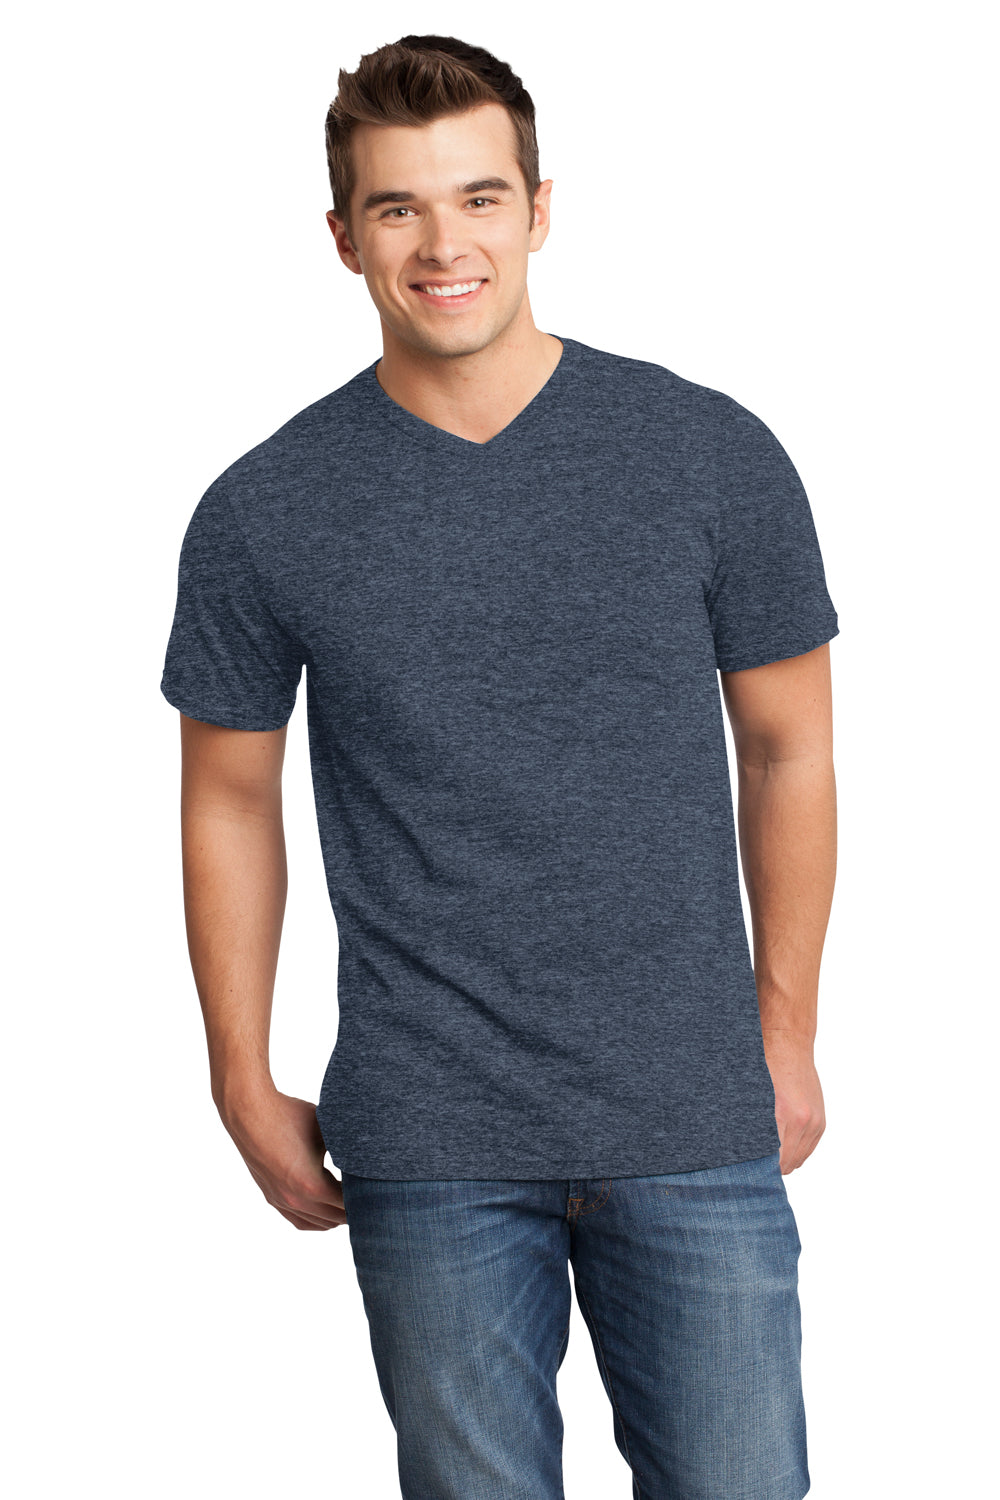 District DT6500 Mens Very Important Short Sleeve V-Neck T-Shirt Heather Navy Blue Front